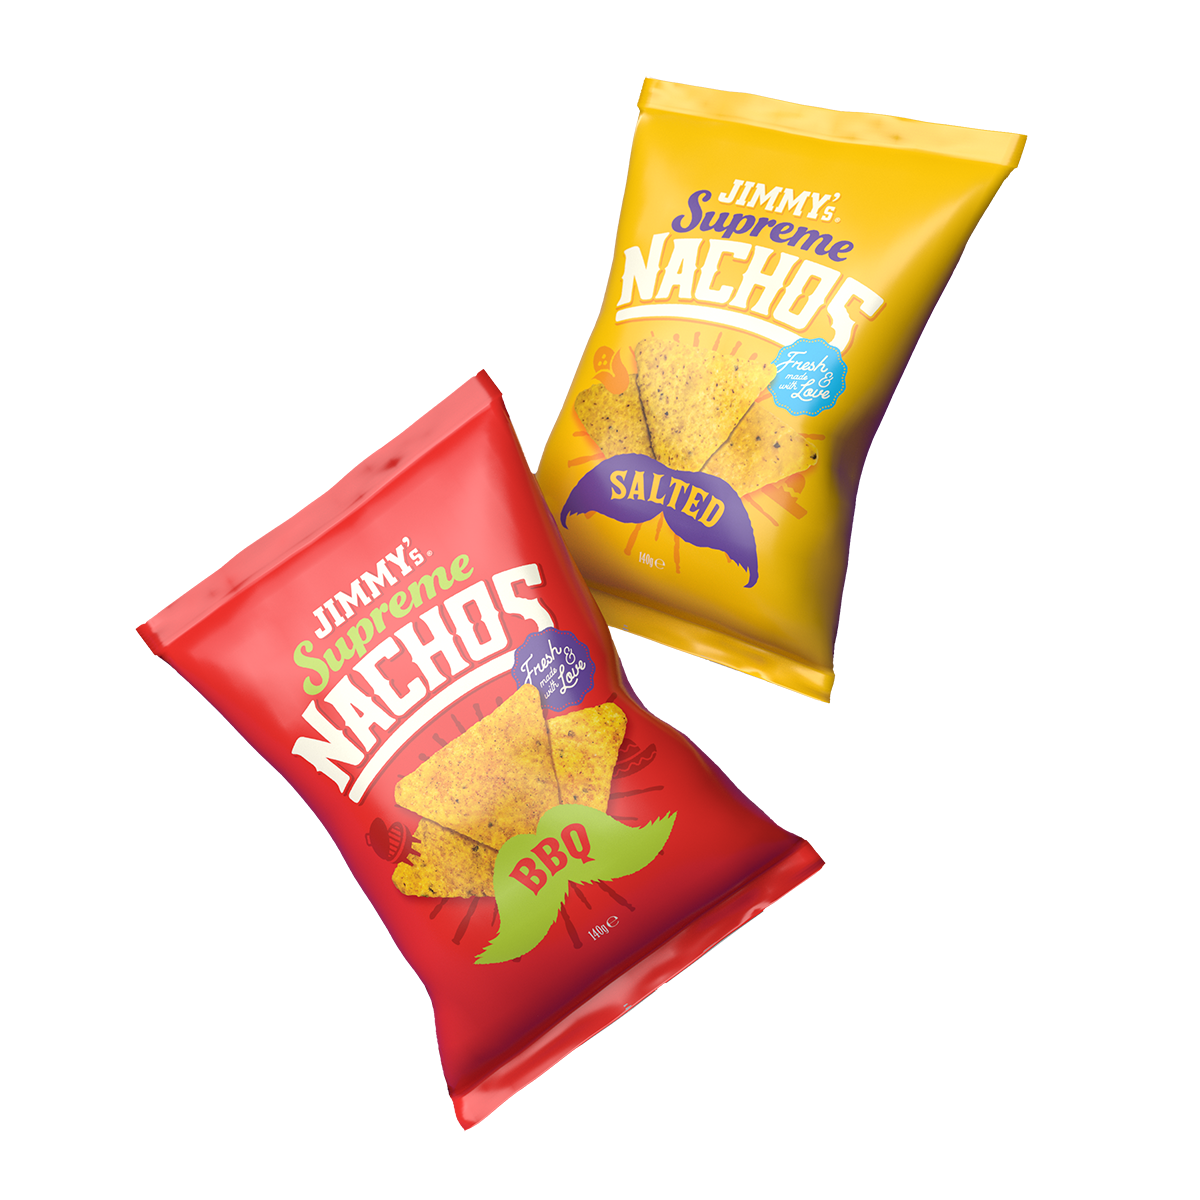 Jimmys Nacho bags in bbq and salted flavours